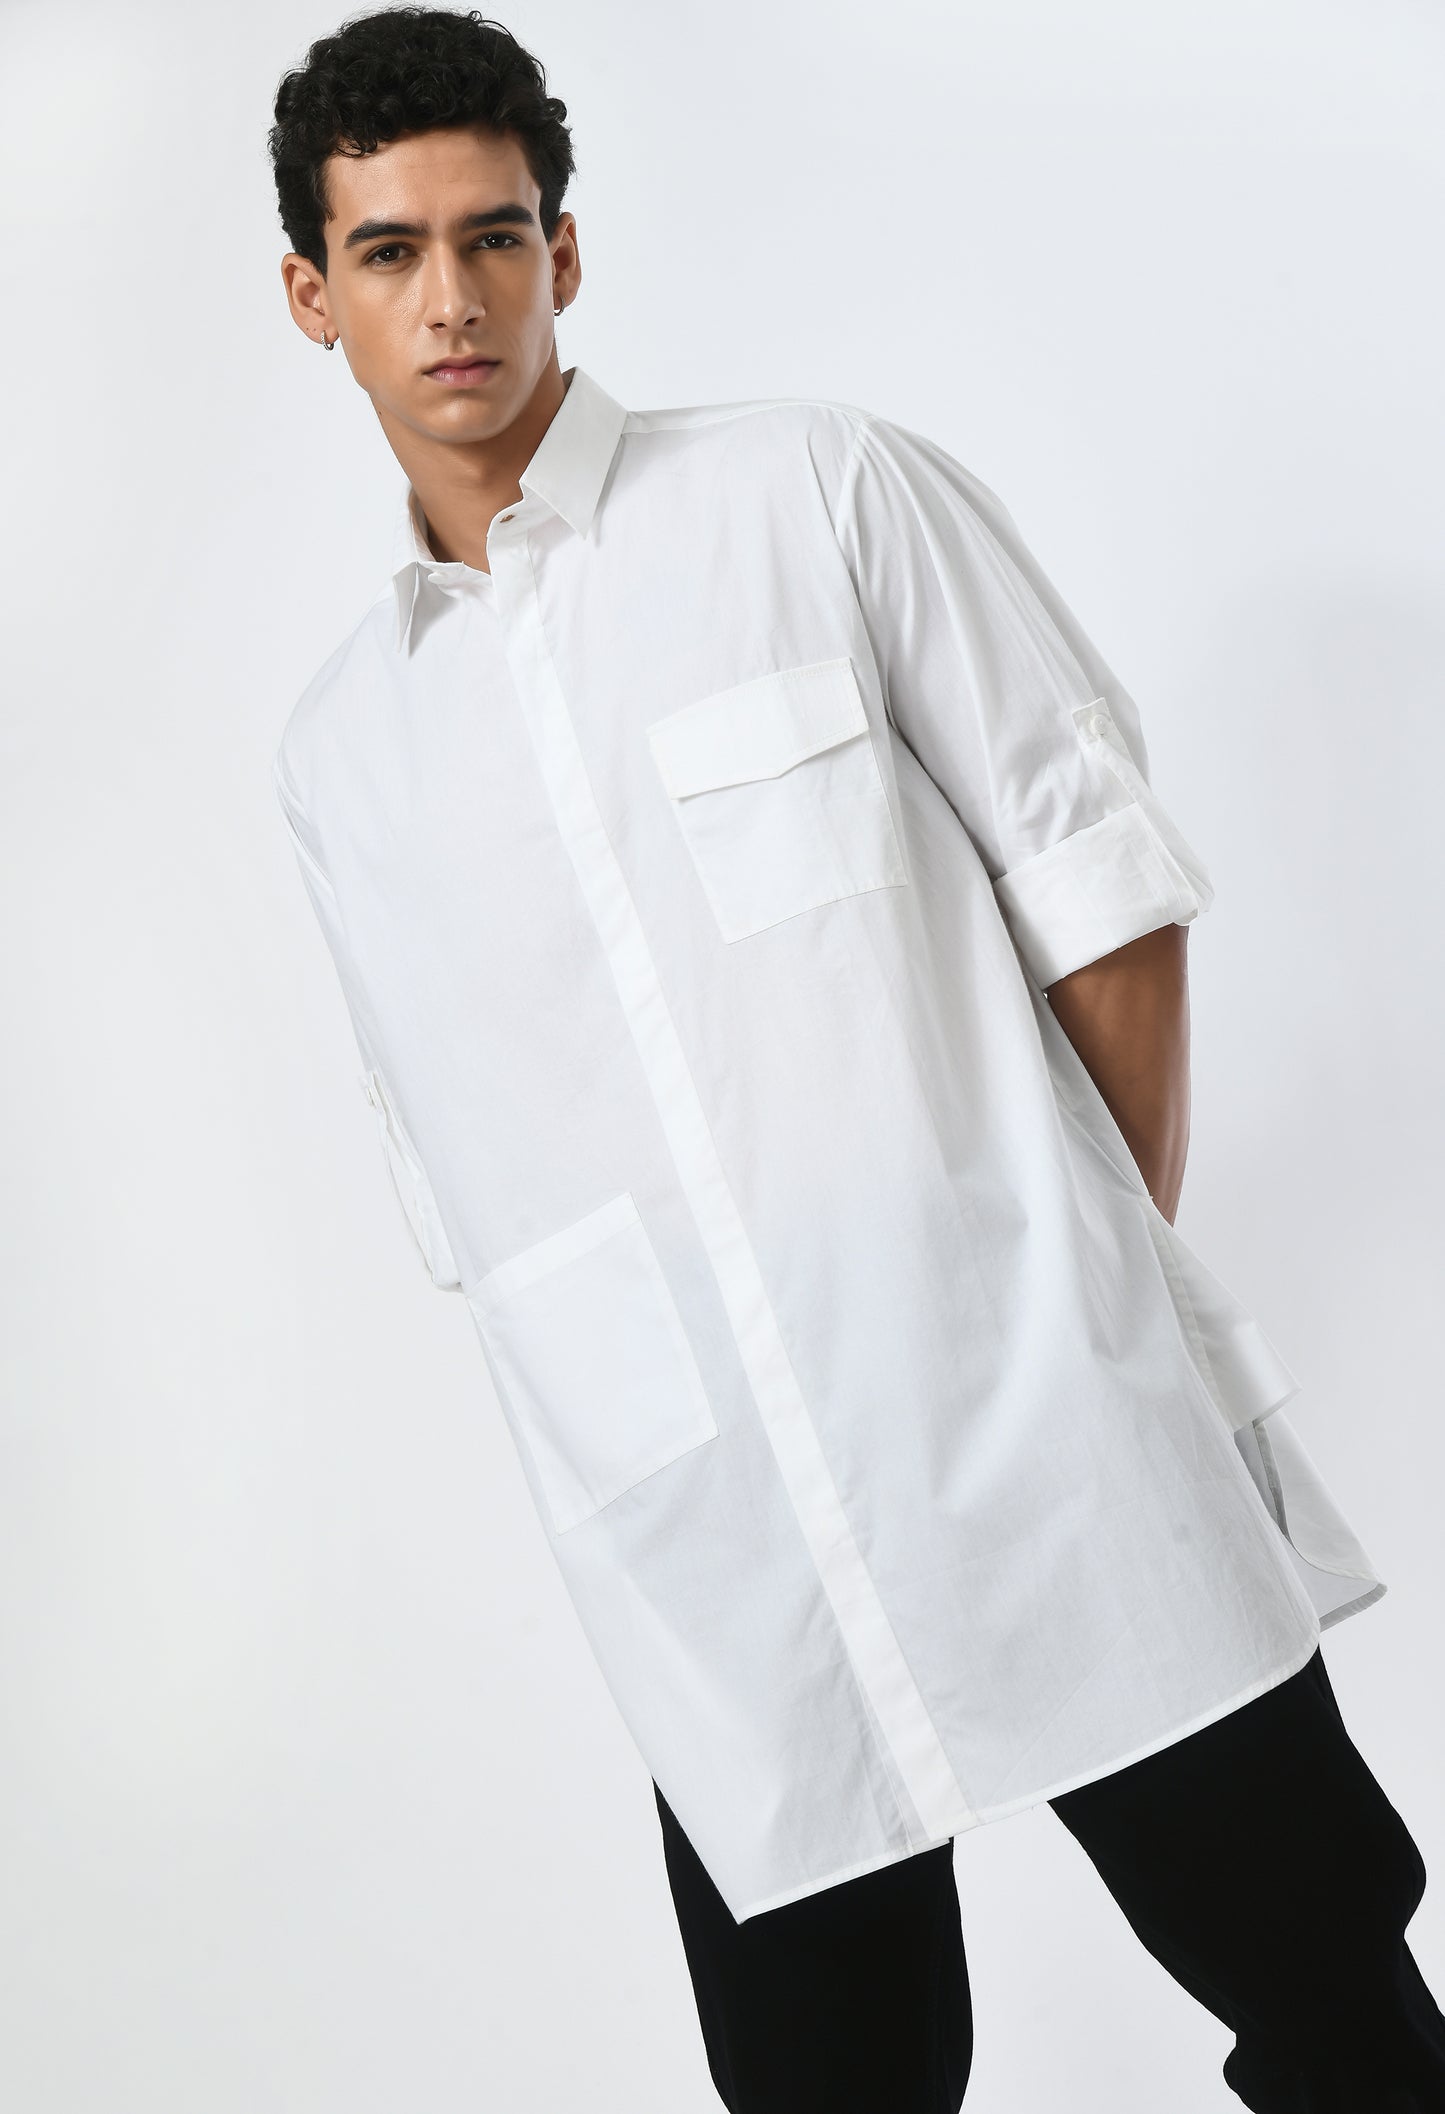 White unisex cotton shirt with classic collar.